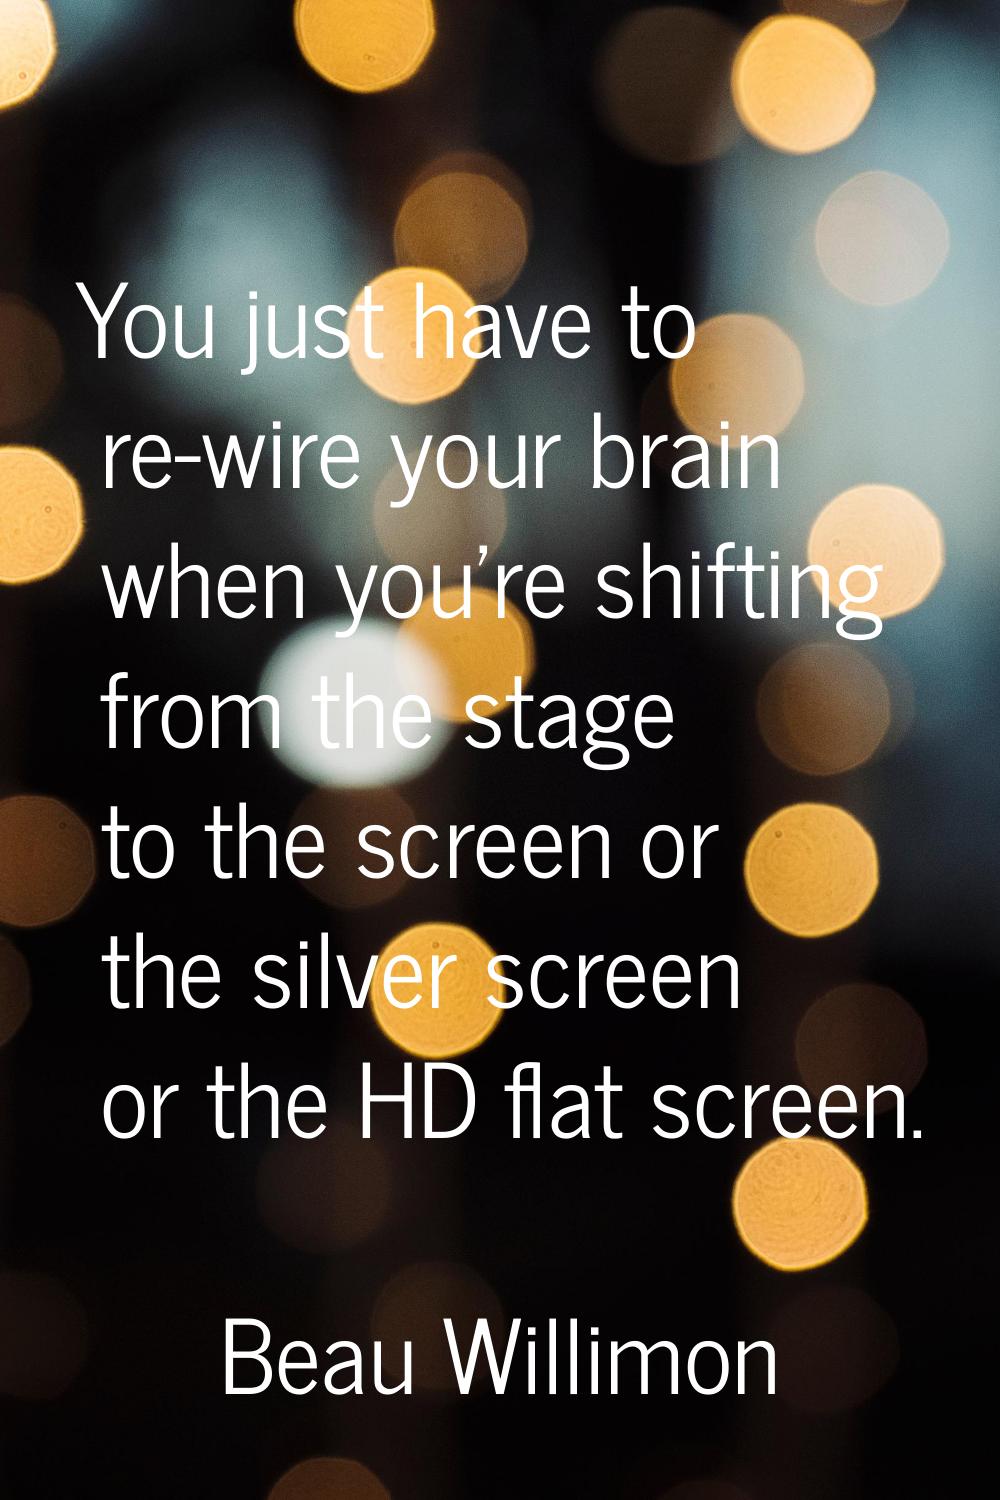 You just have to re-wire your brain when you're shifting from the stage to the screen or the silver